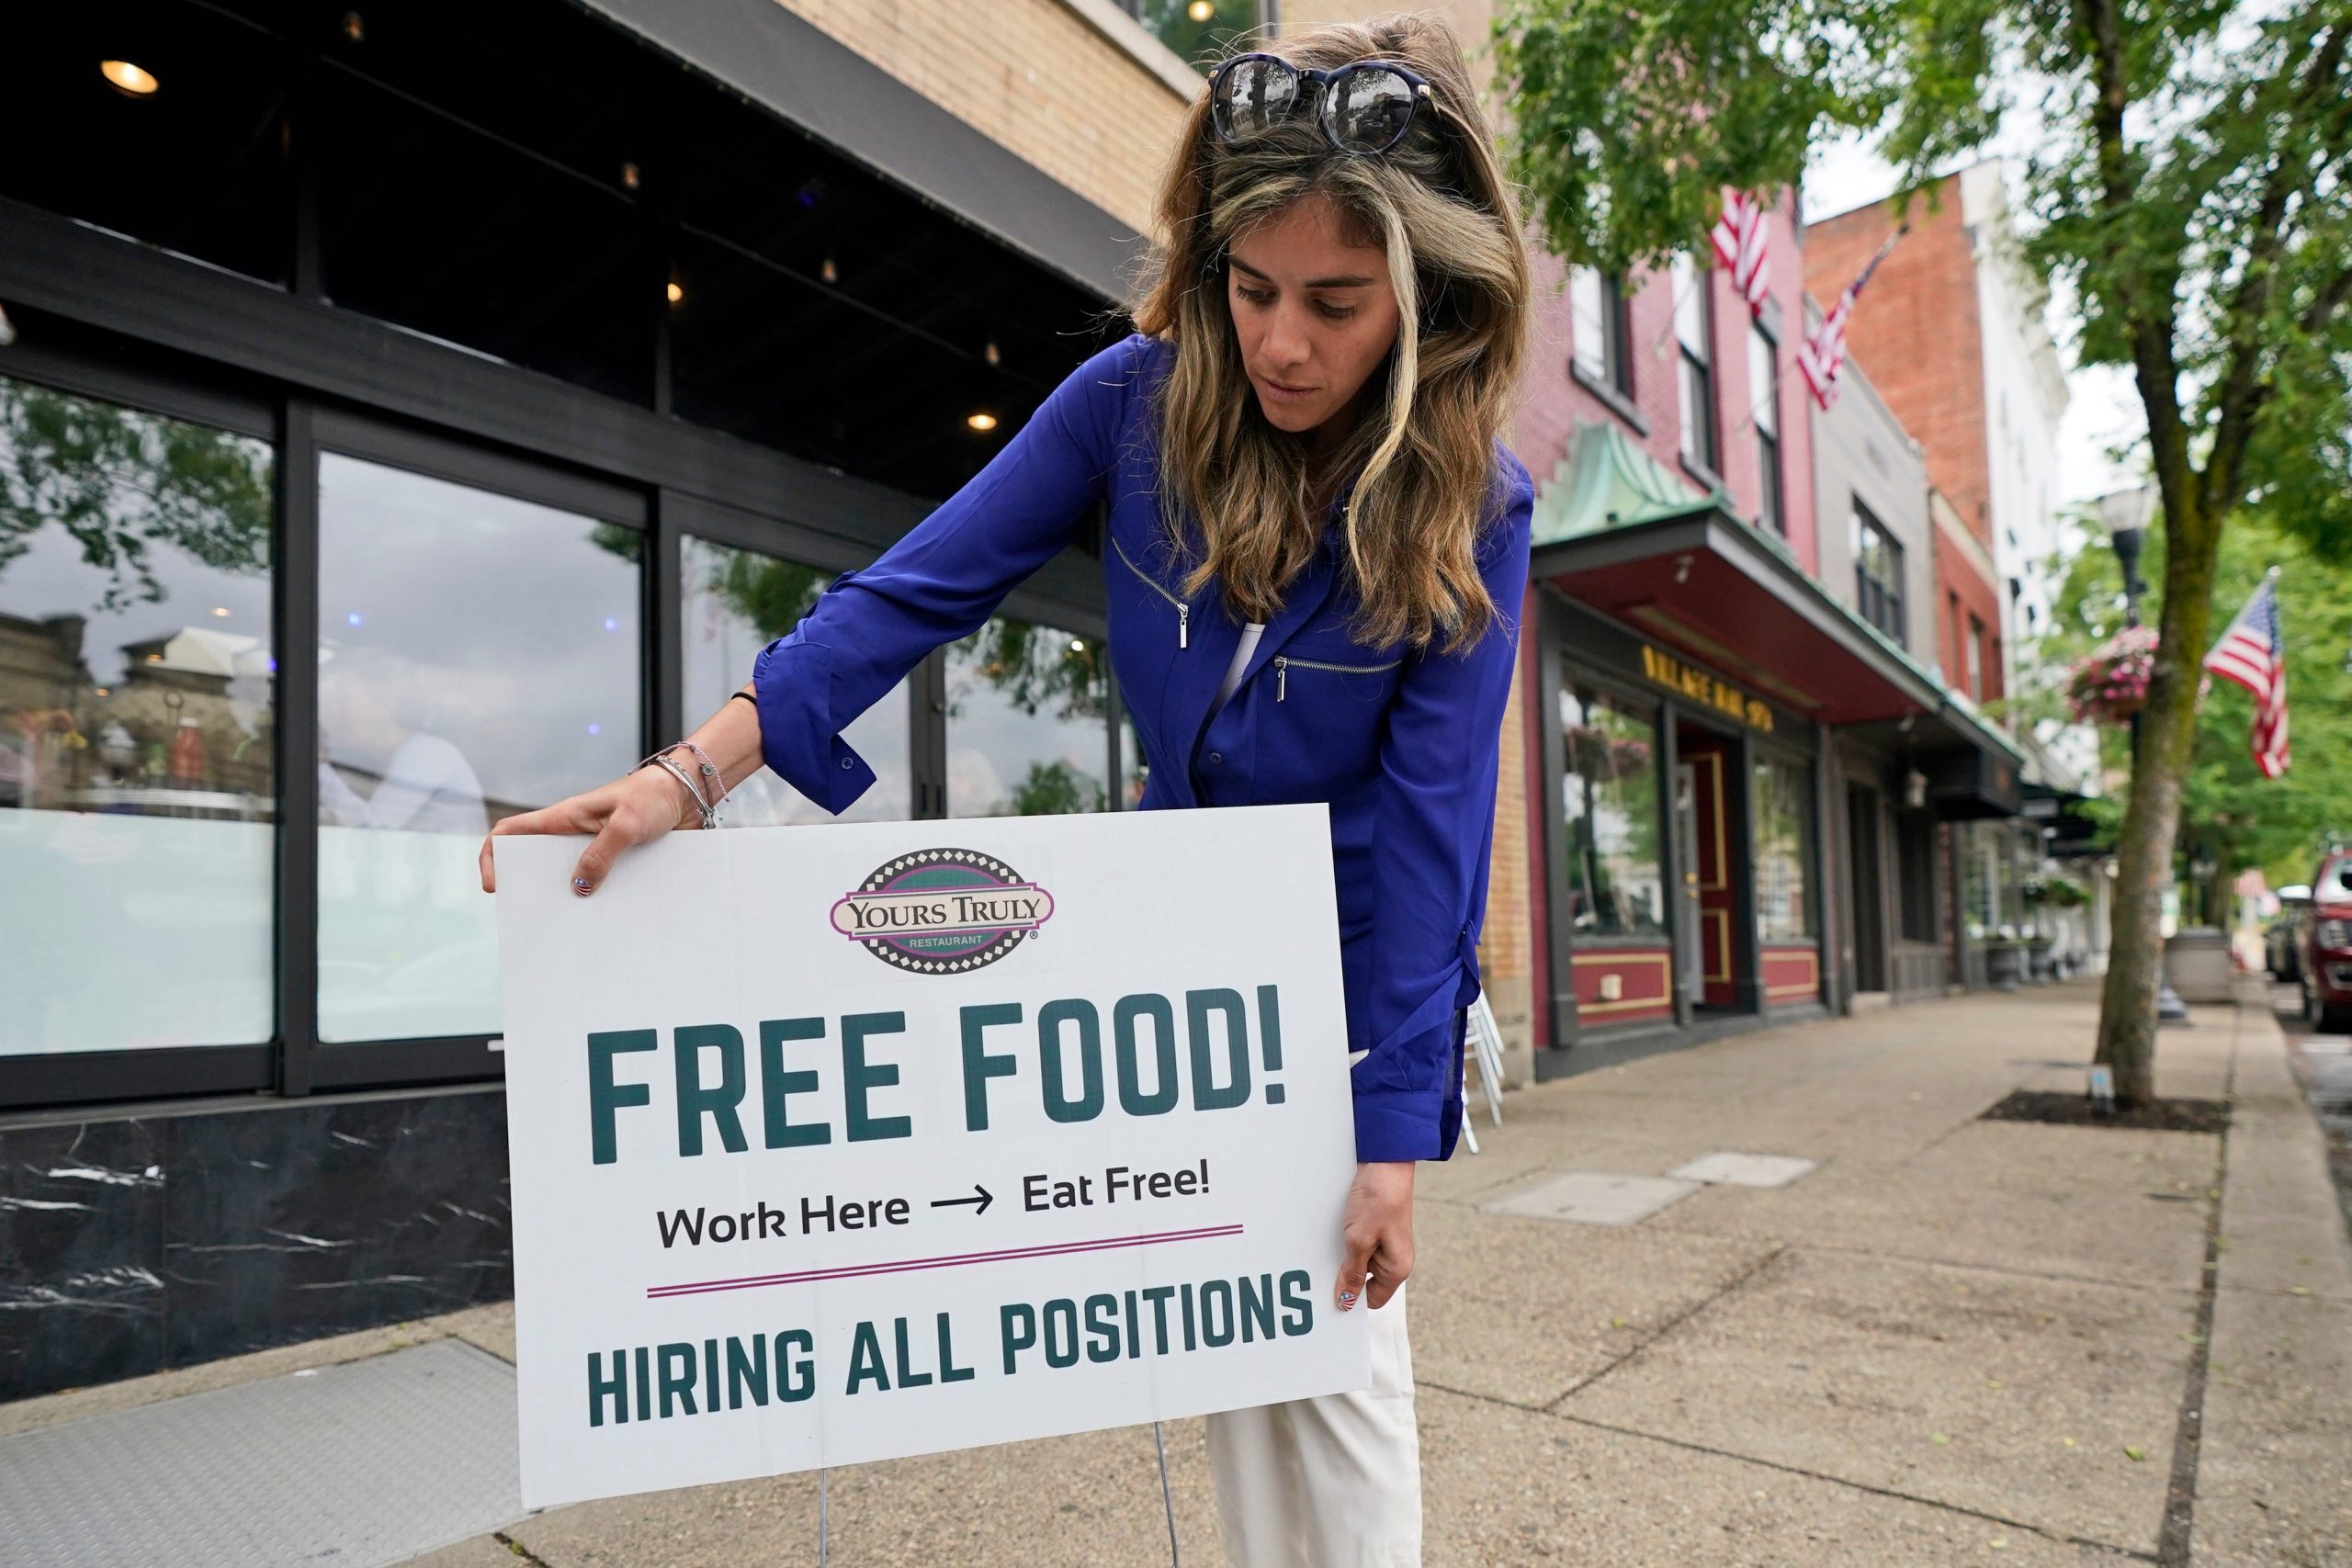 Coleen Piteo, director of marketing at Yours Truly restaurant, puts out a sign that says, "Free Food" and "Hiring all positions" to lure in job applicants.